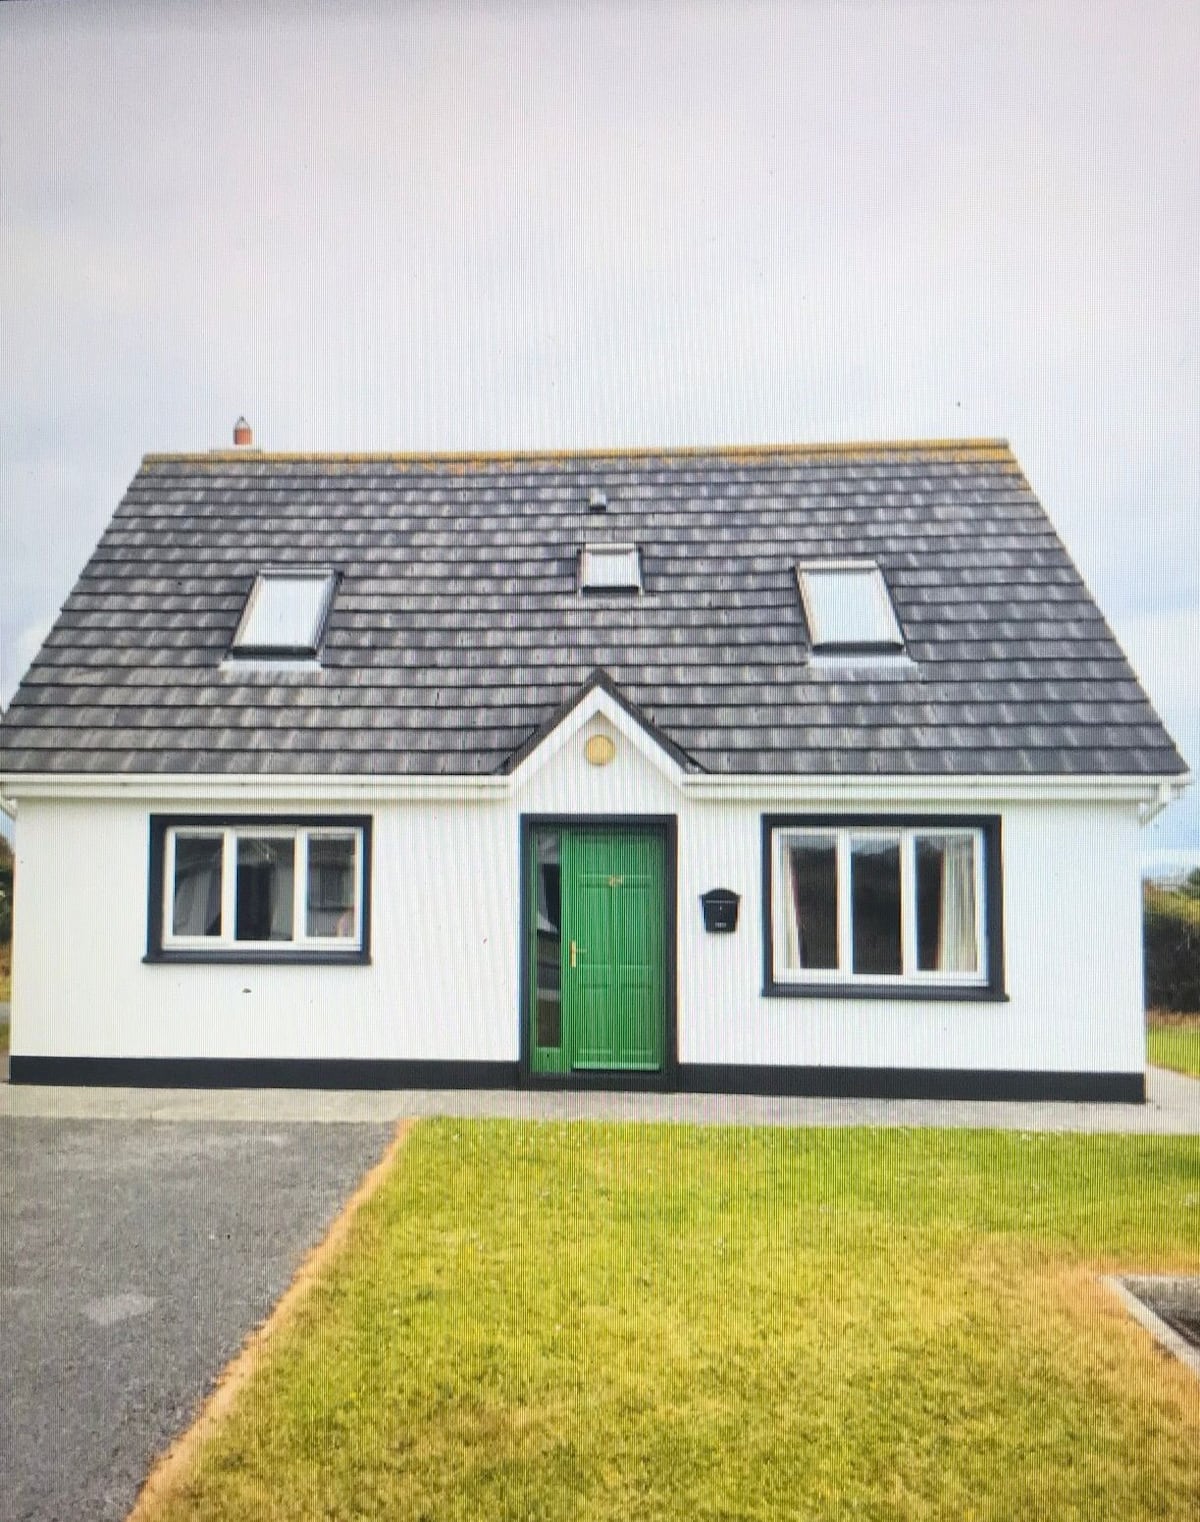 Lovely 3 bed home in Ballybunion, Kerry, Ireland